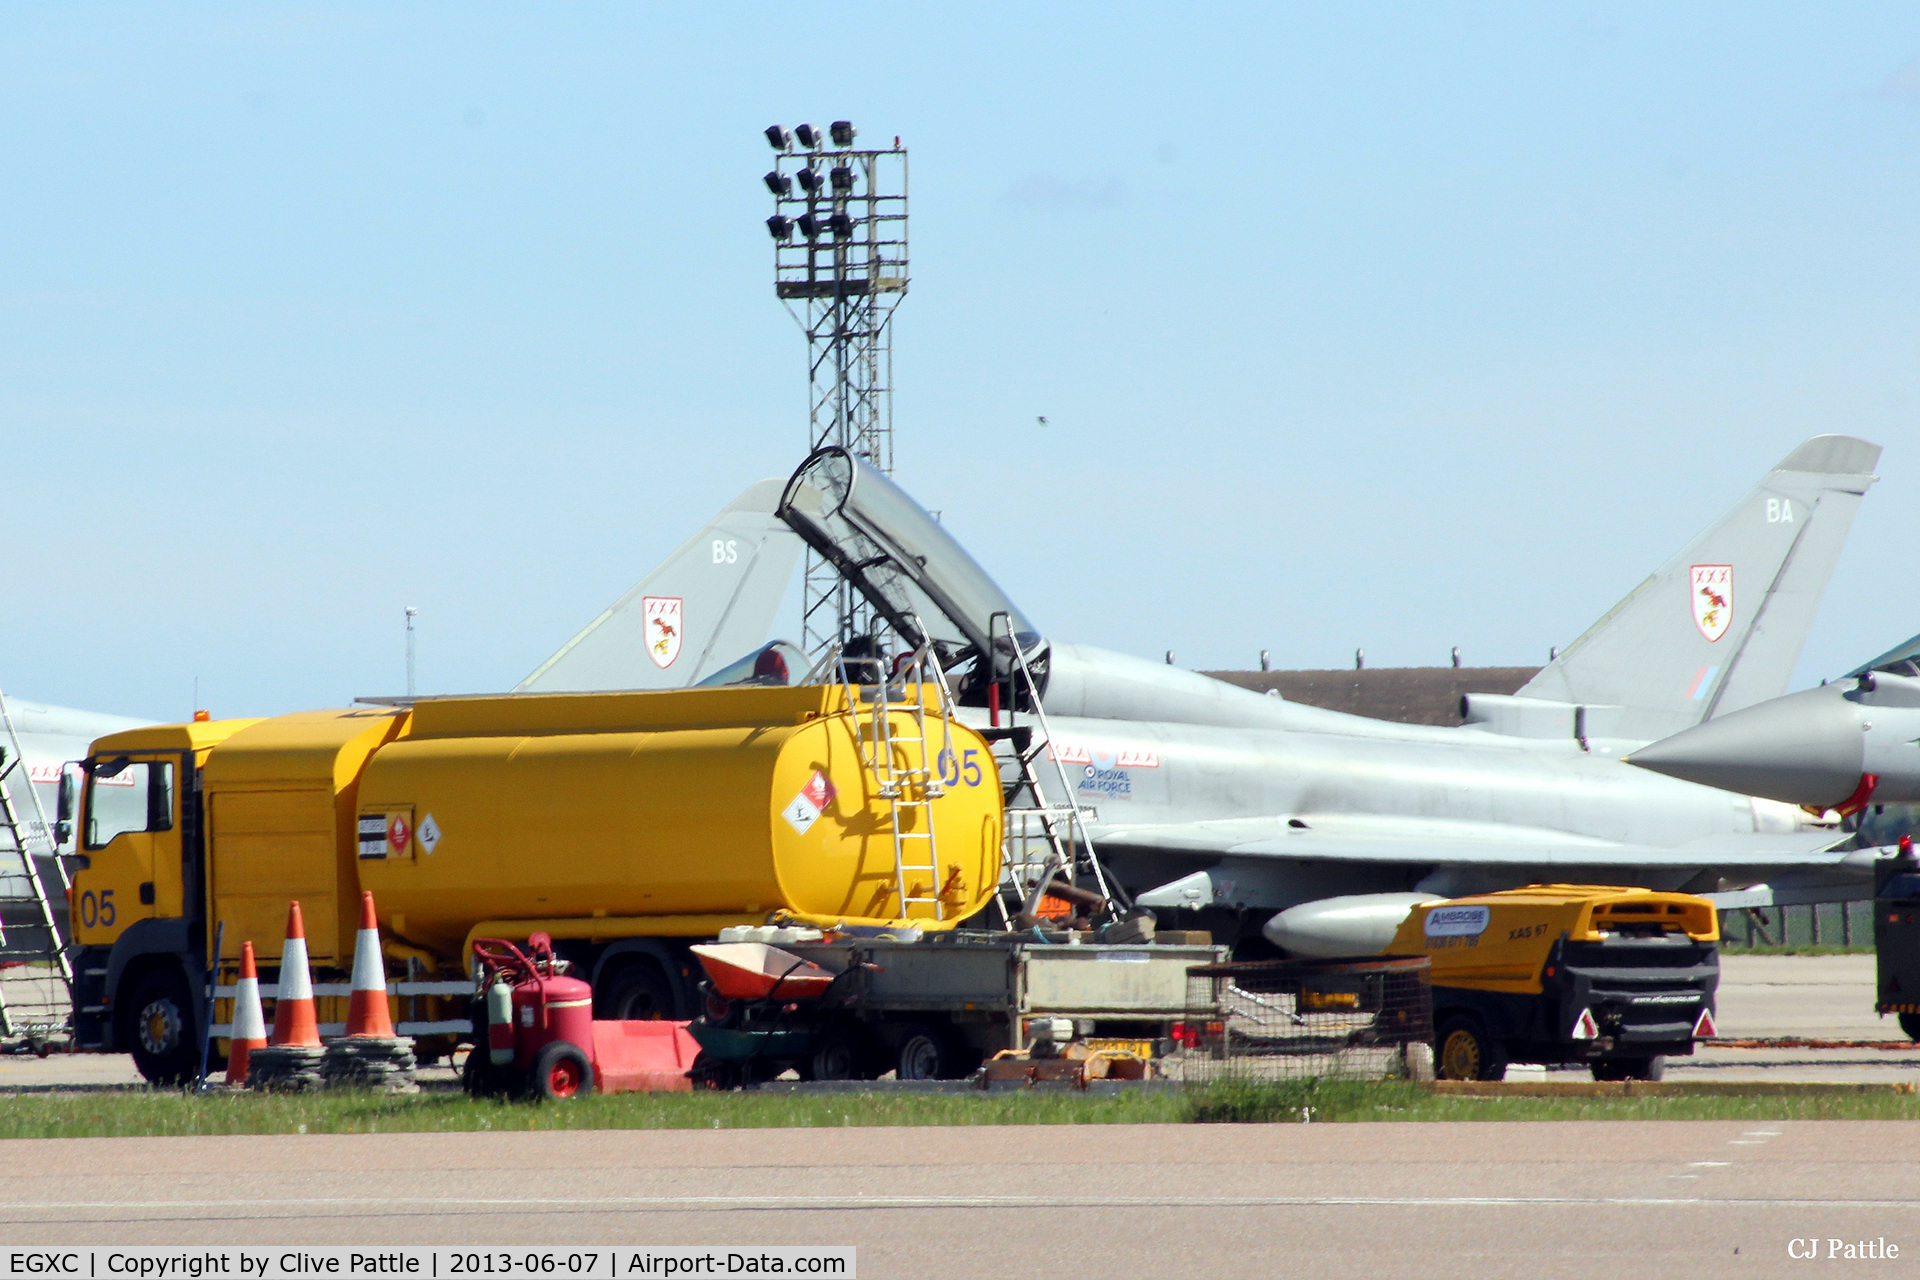 RAF Coningsby Airport, Coningsby, England United Kingdom (EGXC) - Bowser re-fuel action at RAF Coningsby